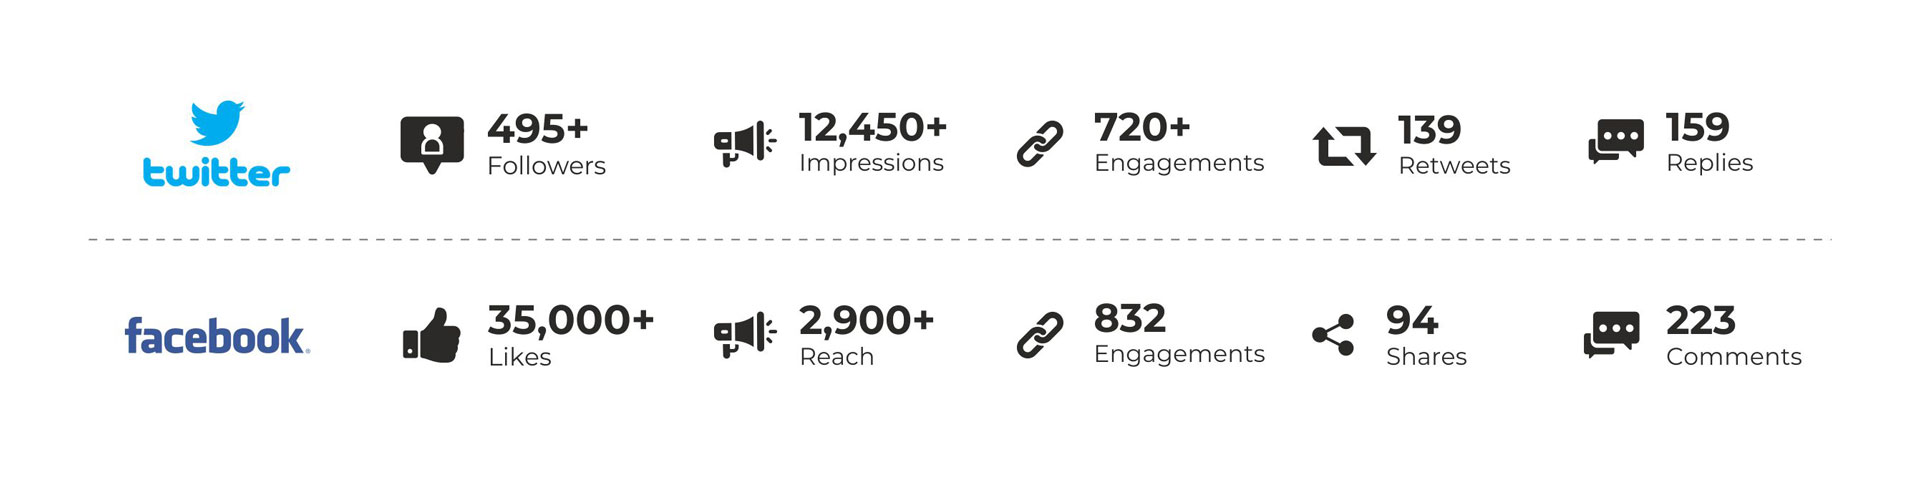 Twitter and Facebook insights 